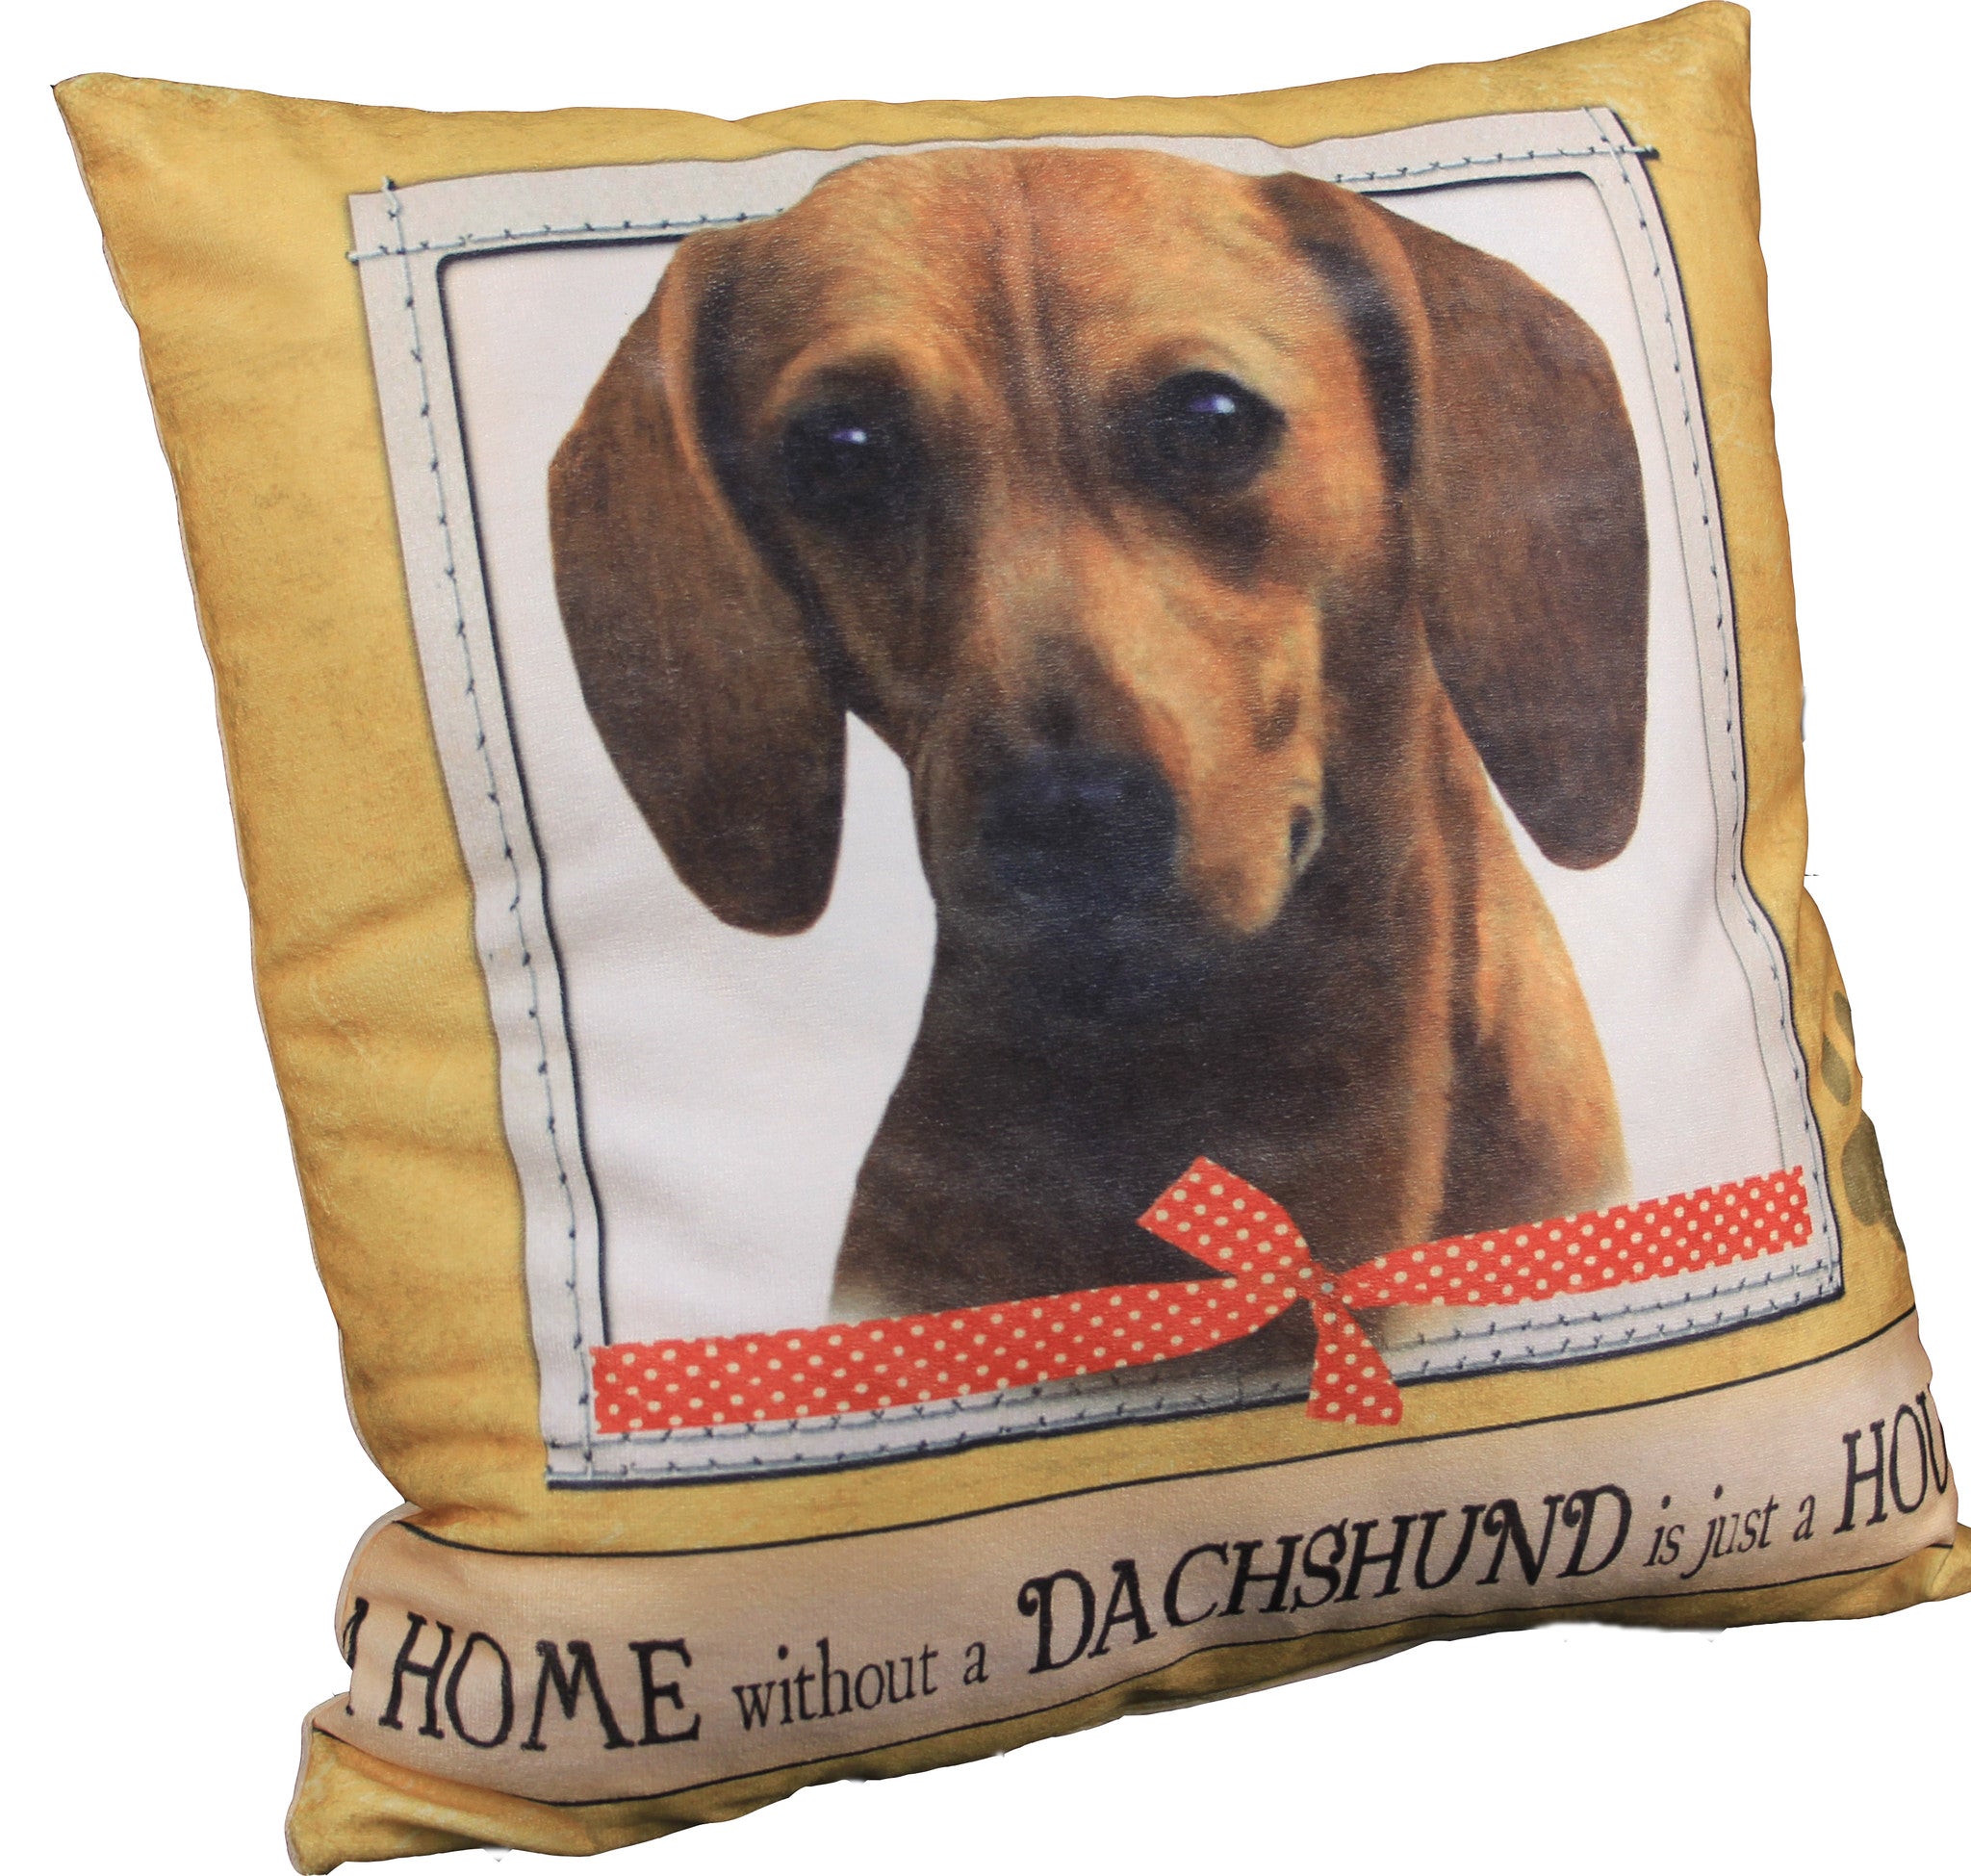 Dachshund Red Dog Breed Throw Pillow